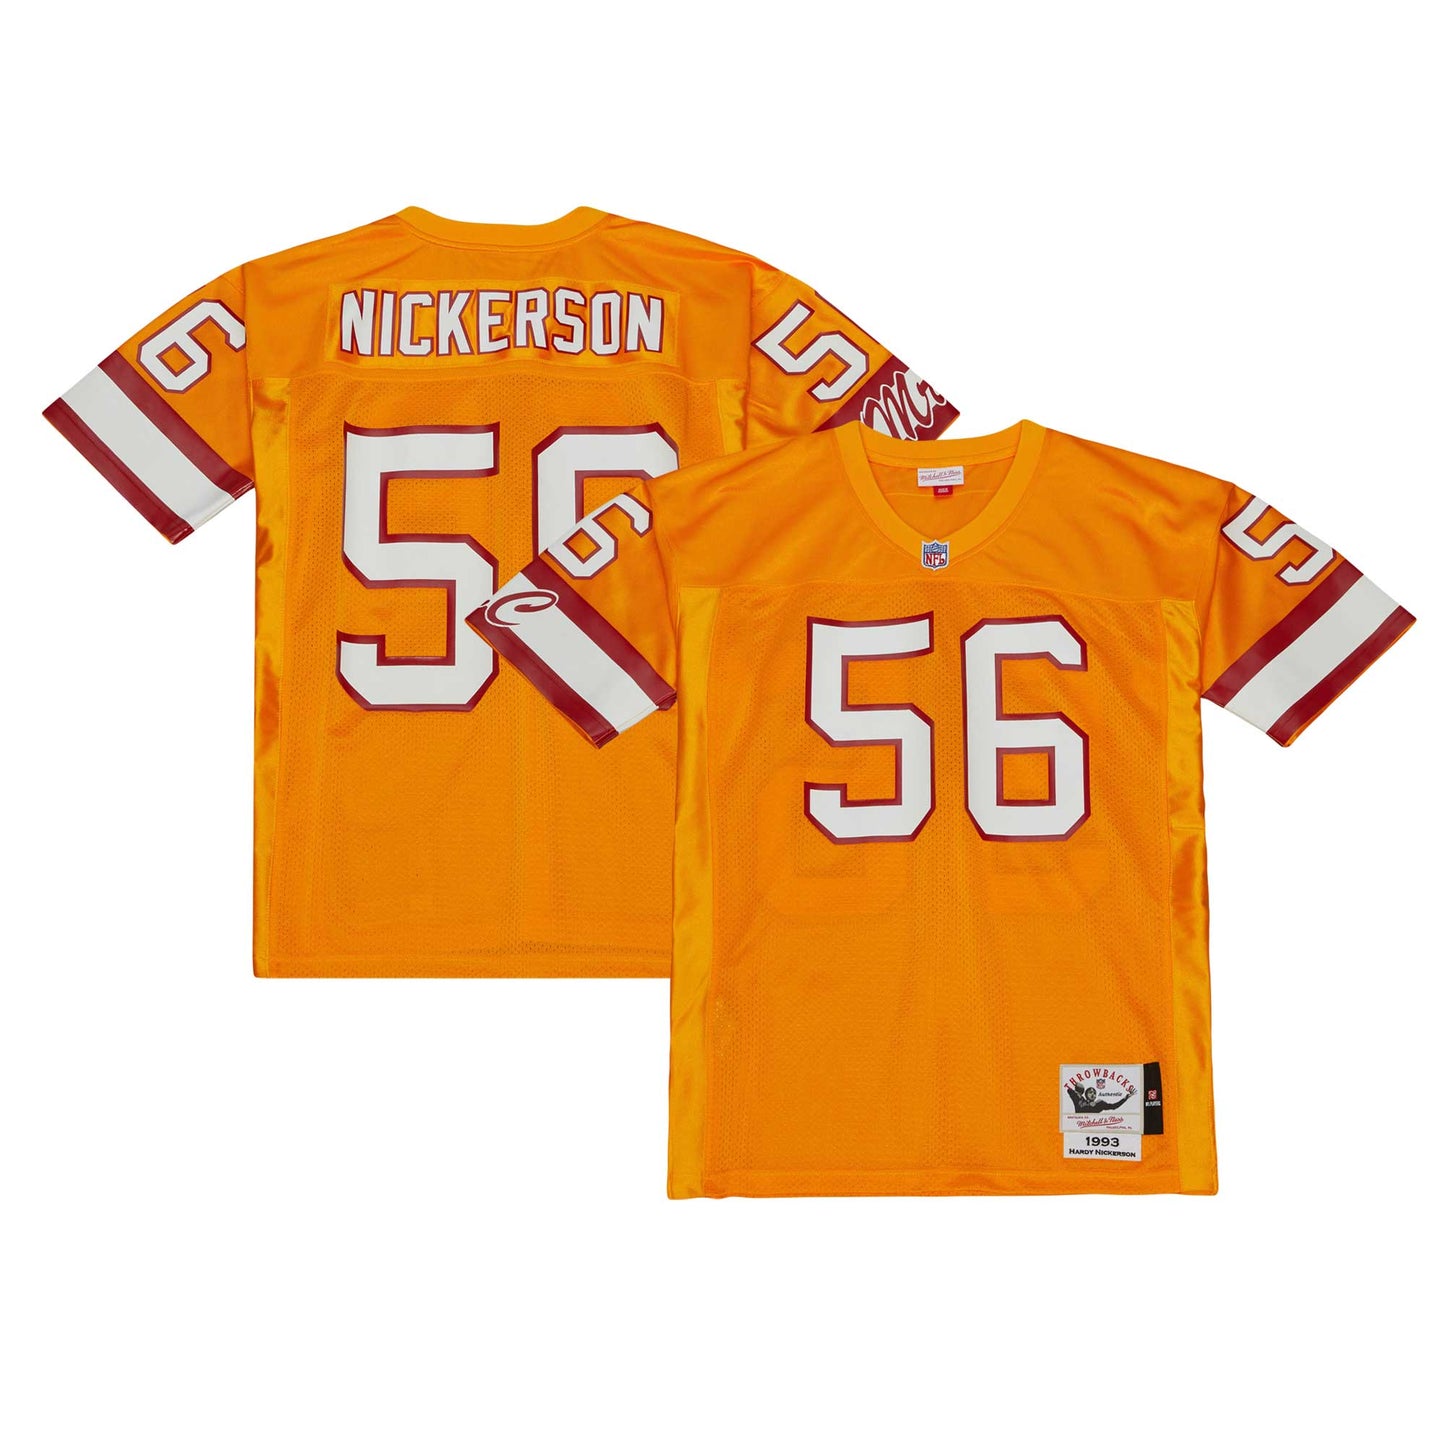 Hardy Nickerson Tampa Bay Buccaneers Mitchell & Ness 1993 Authentic Jersey - Orange